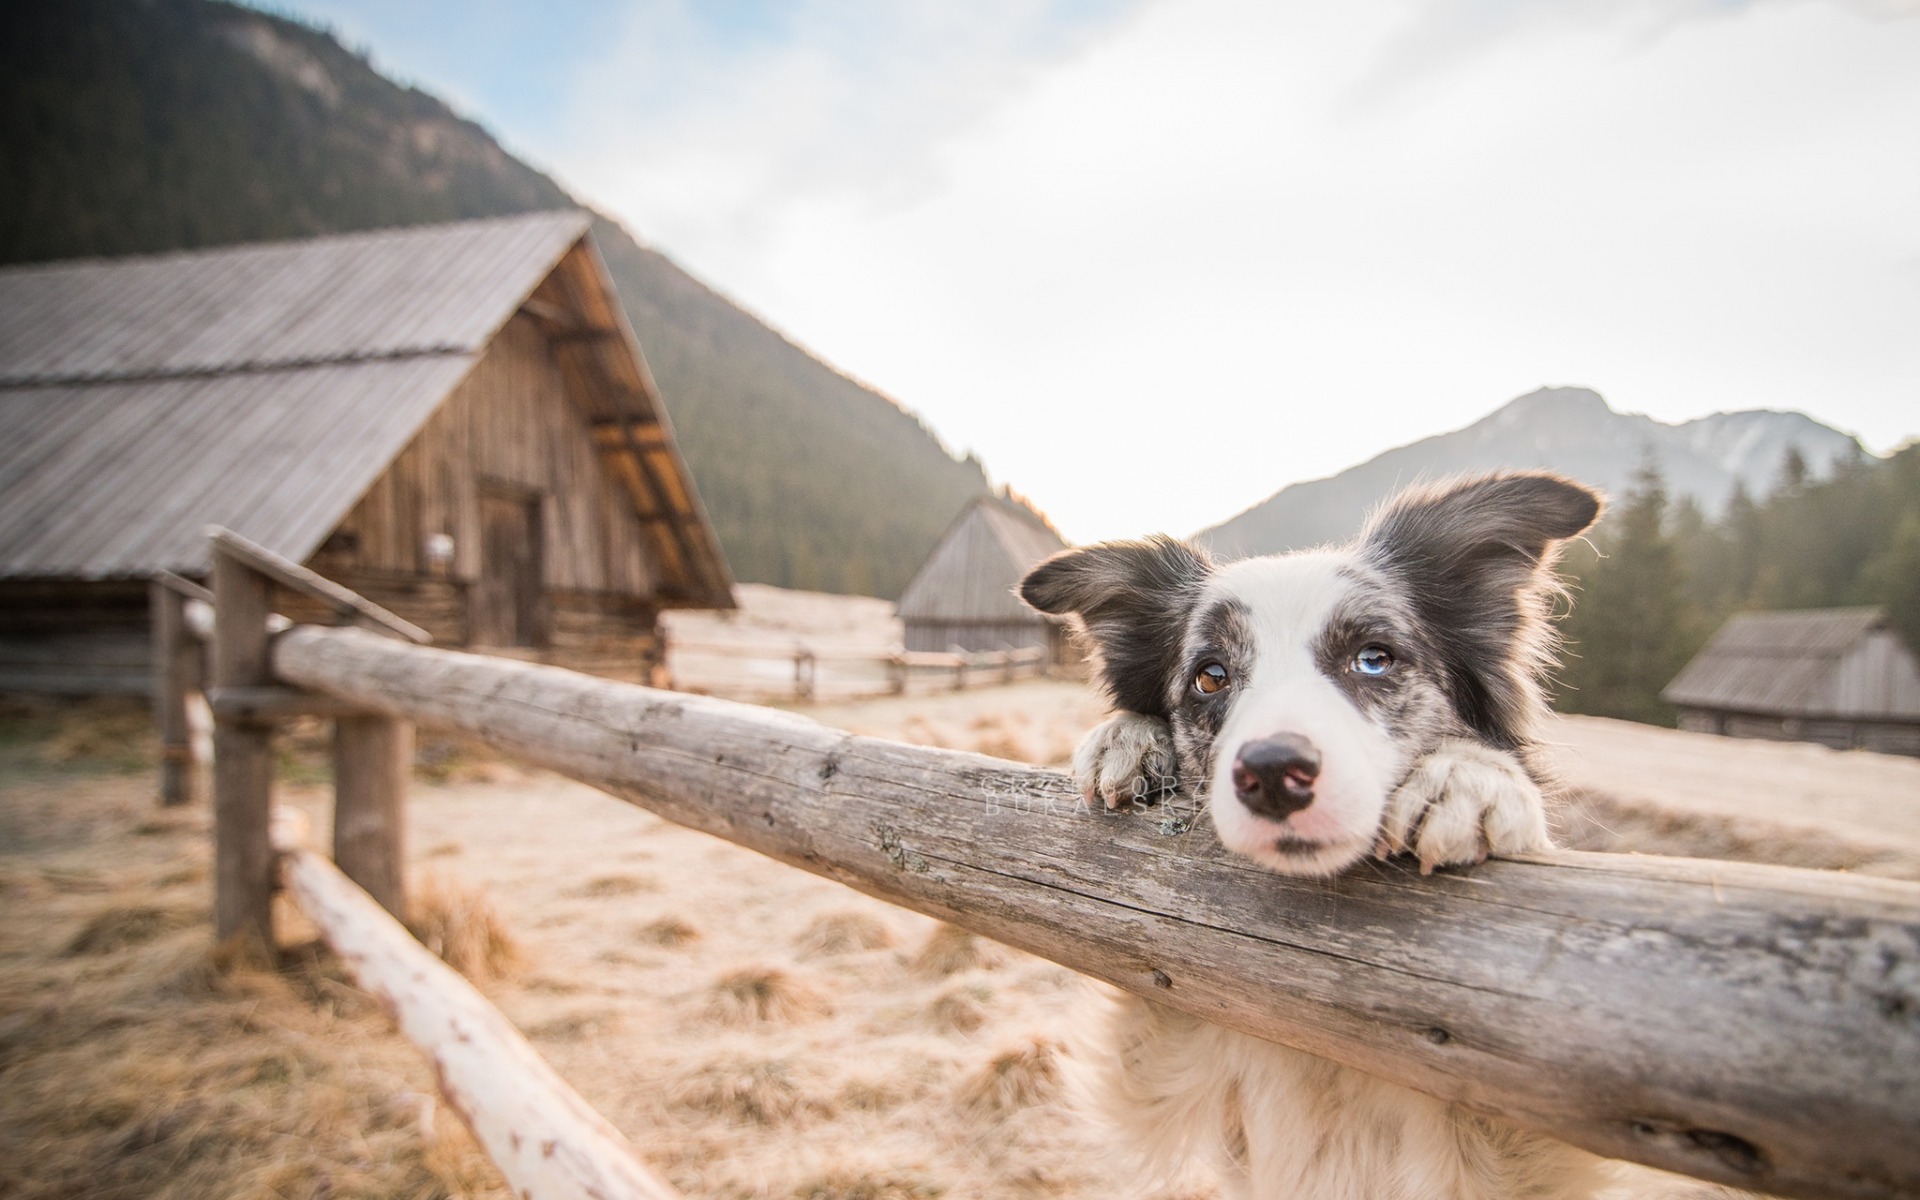 Download wallpapers Australian Shepherd, Aussie, domestic dog, American dogs, farm, ranch, cute animals, dogs for desktop with resolution 1920x1200. High Quality HD pictures wallpapers